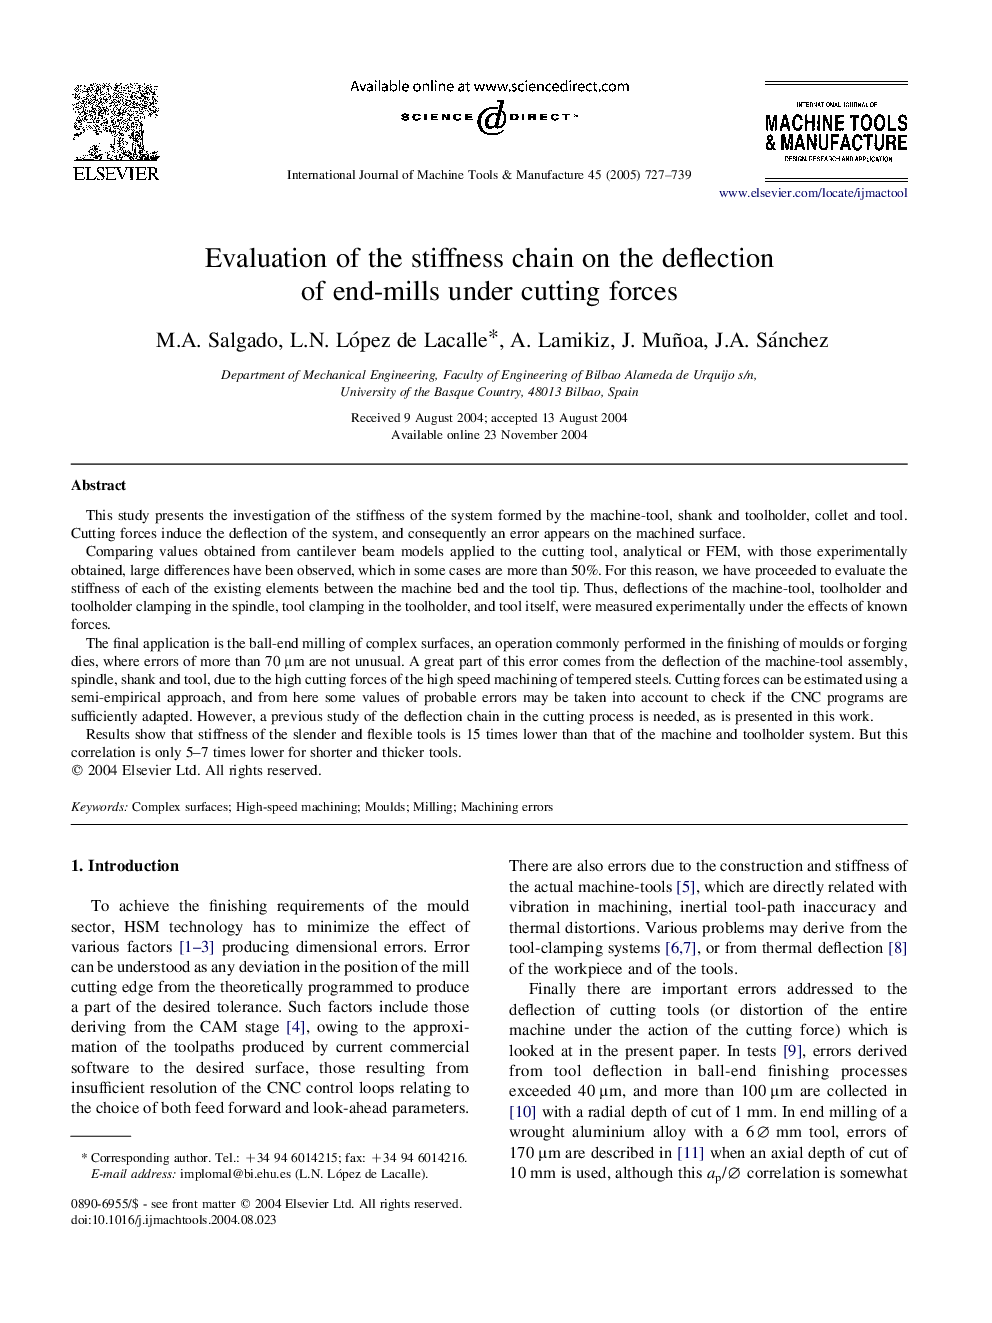 Evaluation of the stiffness chain on the deflection of end-mills under cutting forces